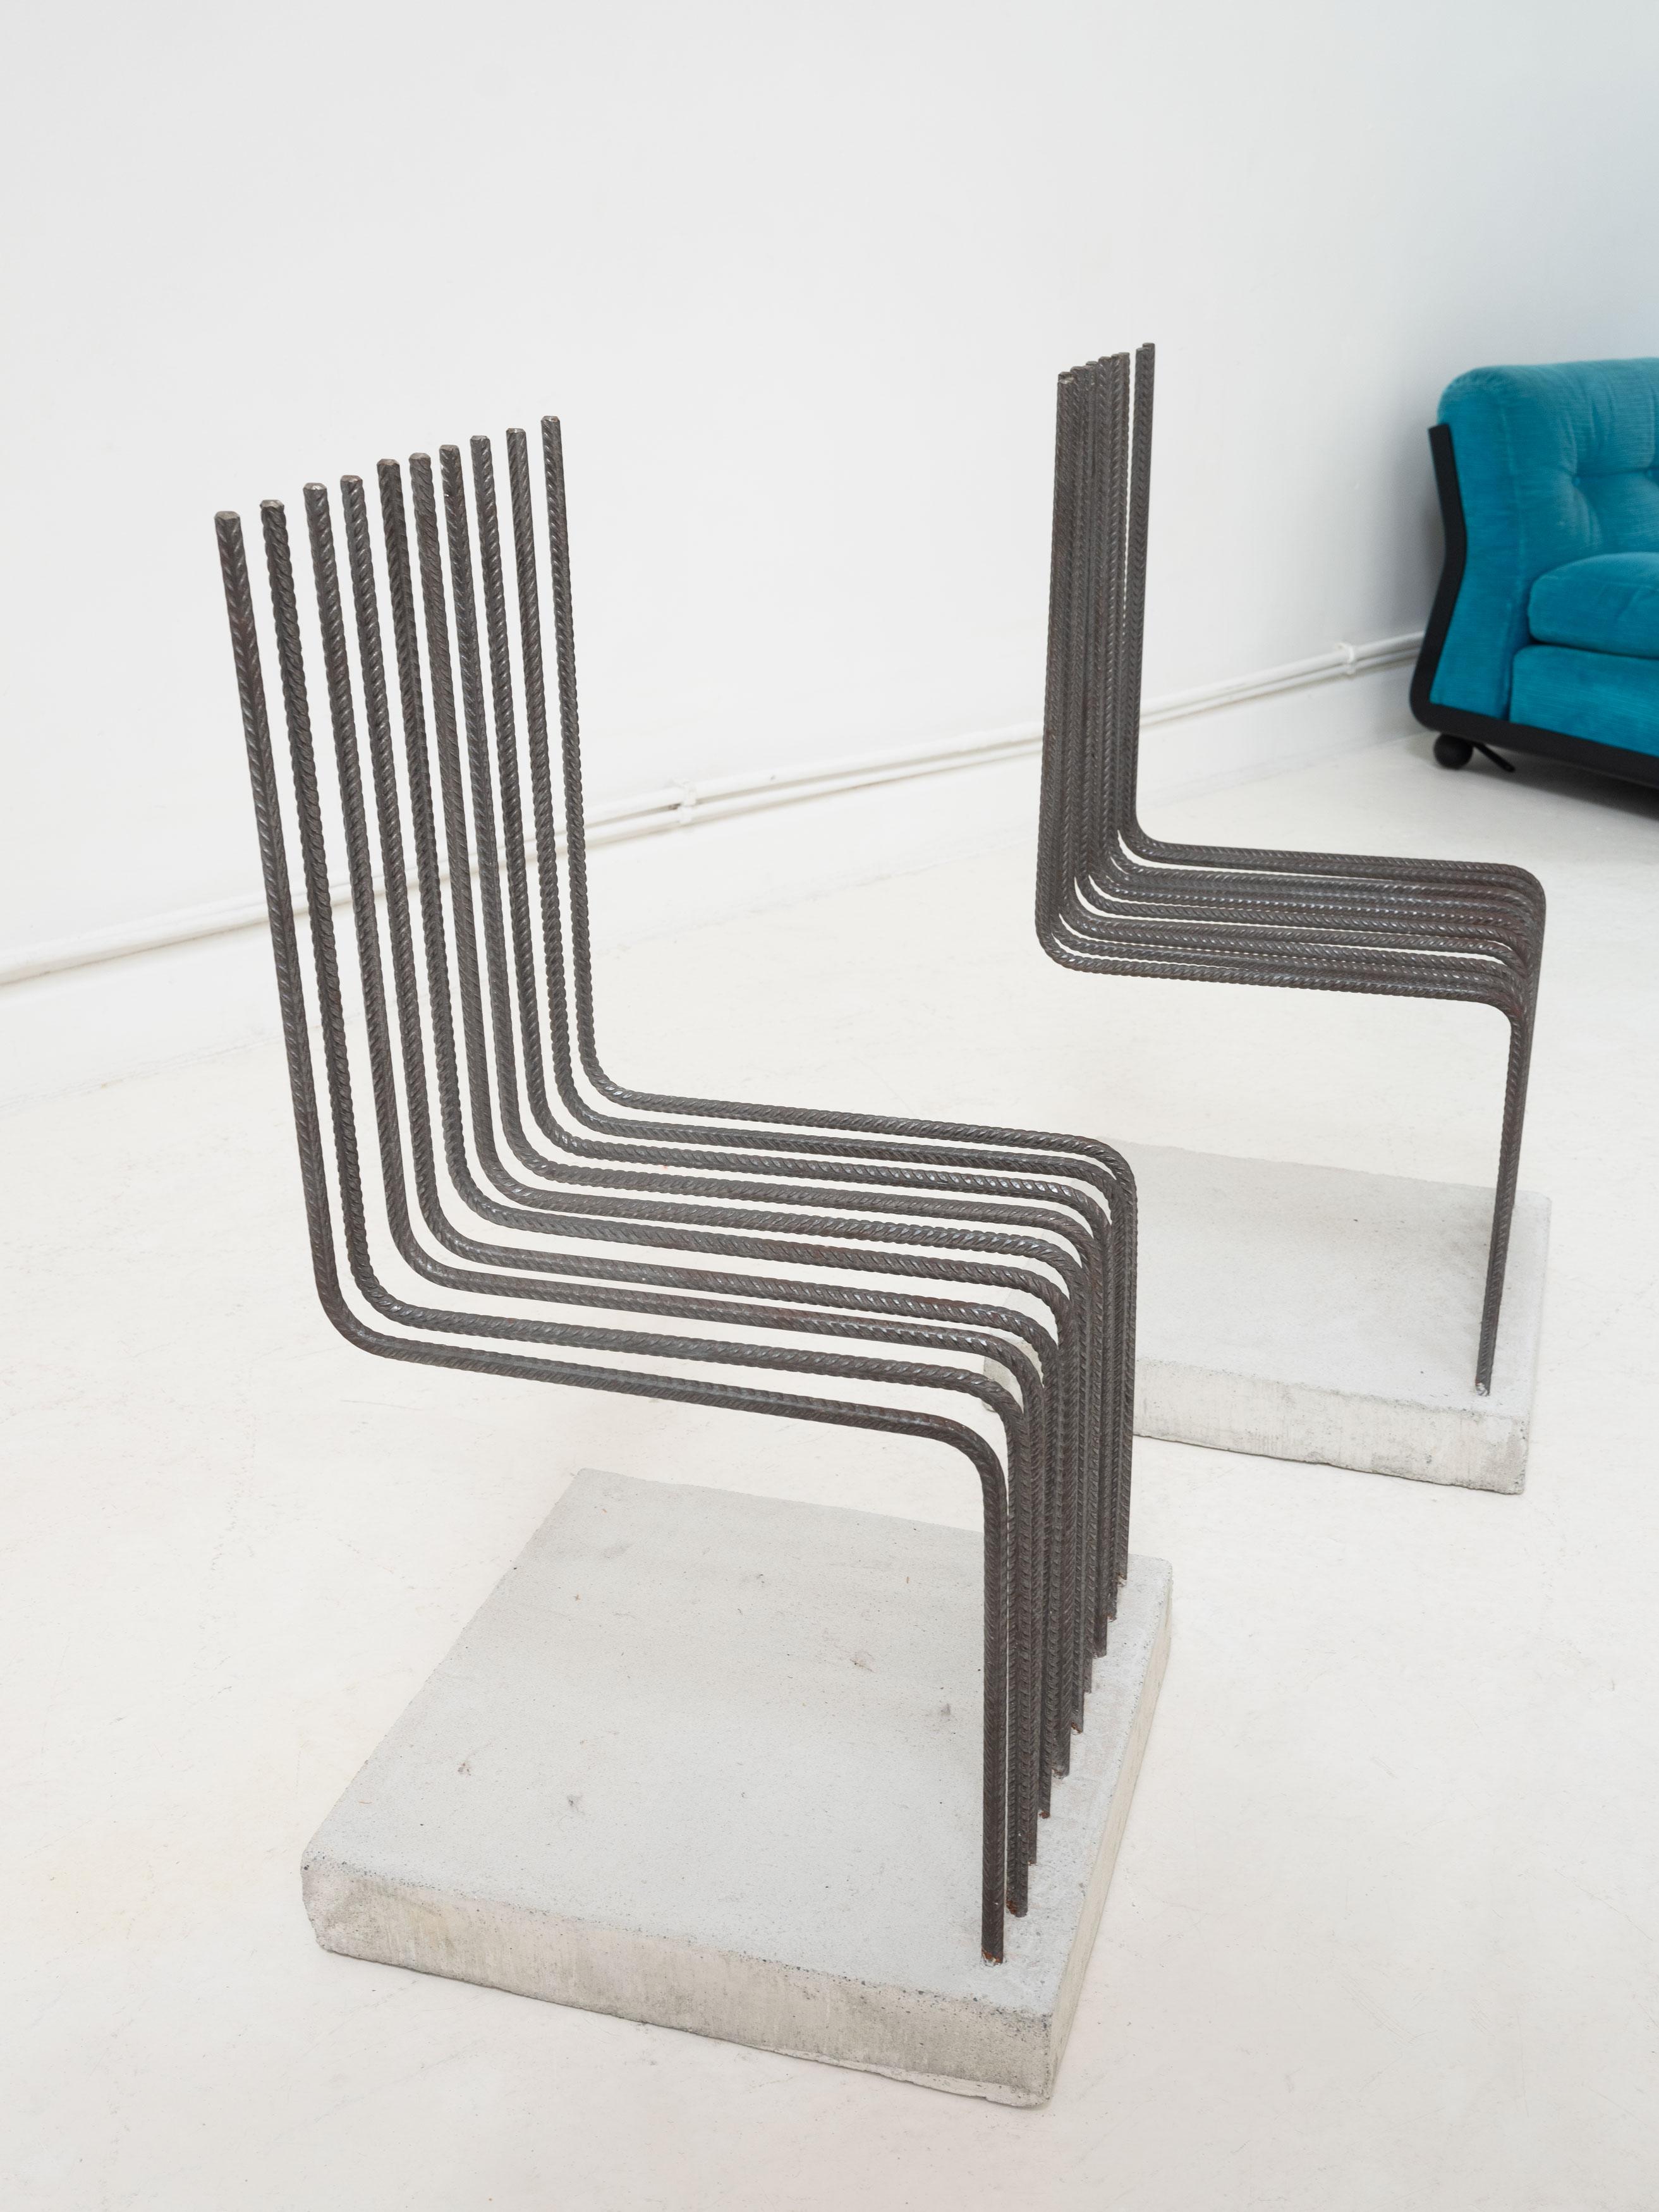 Late 20th Century Postmodern 'Solid Chairs' by Heinz Landes, Germany, 1986. For Sale